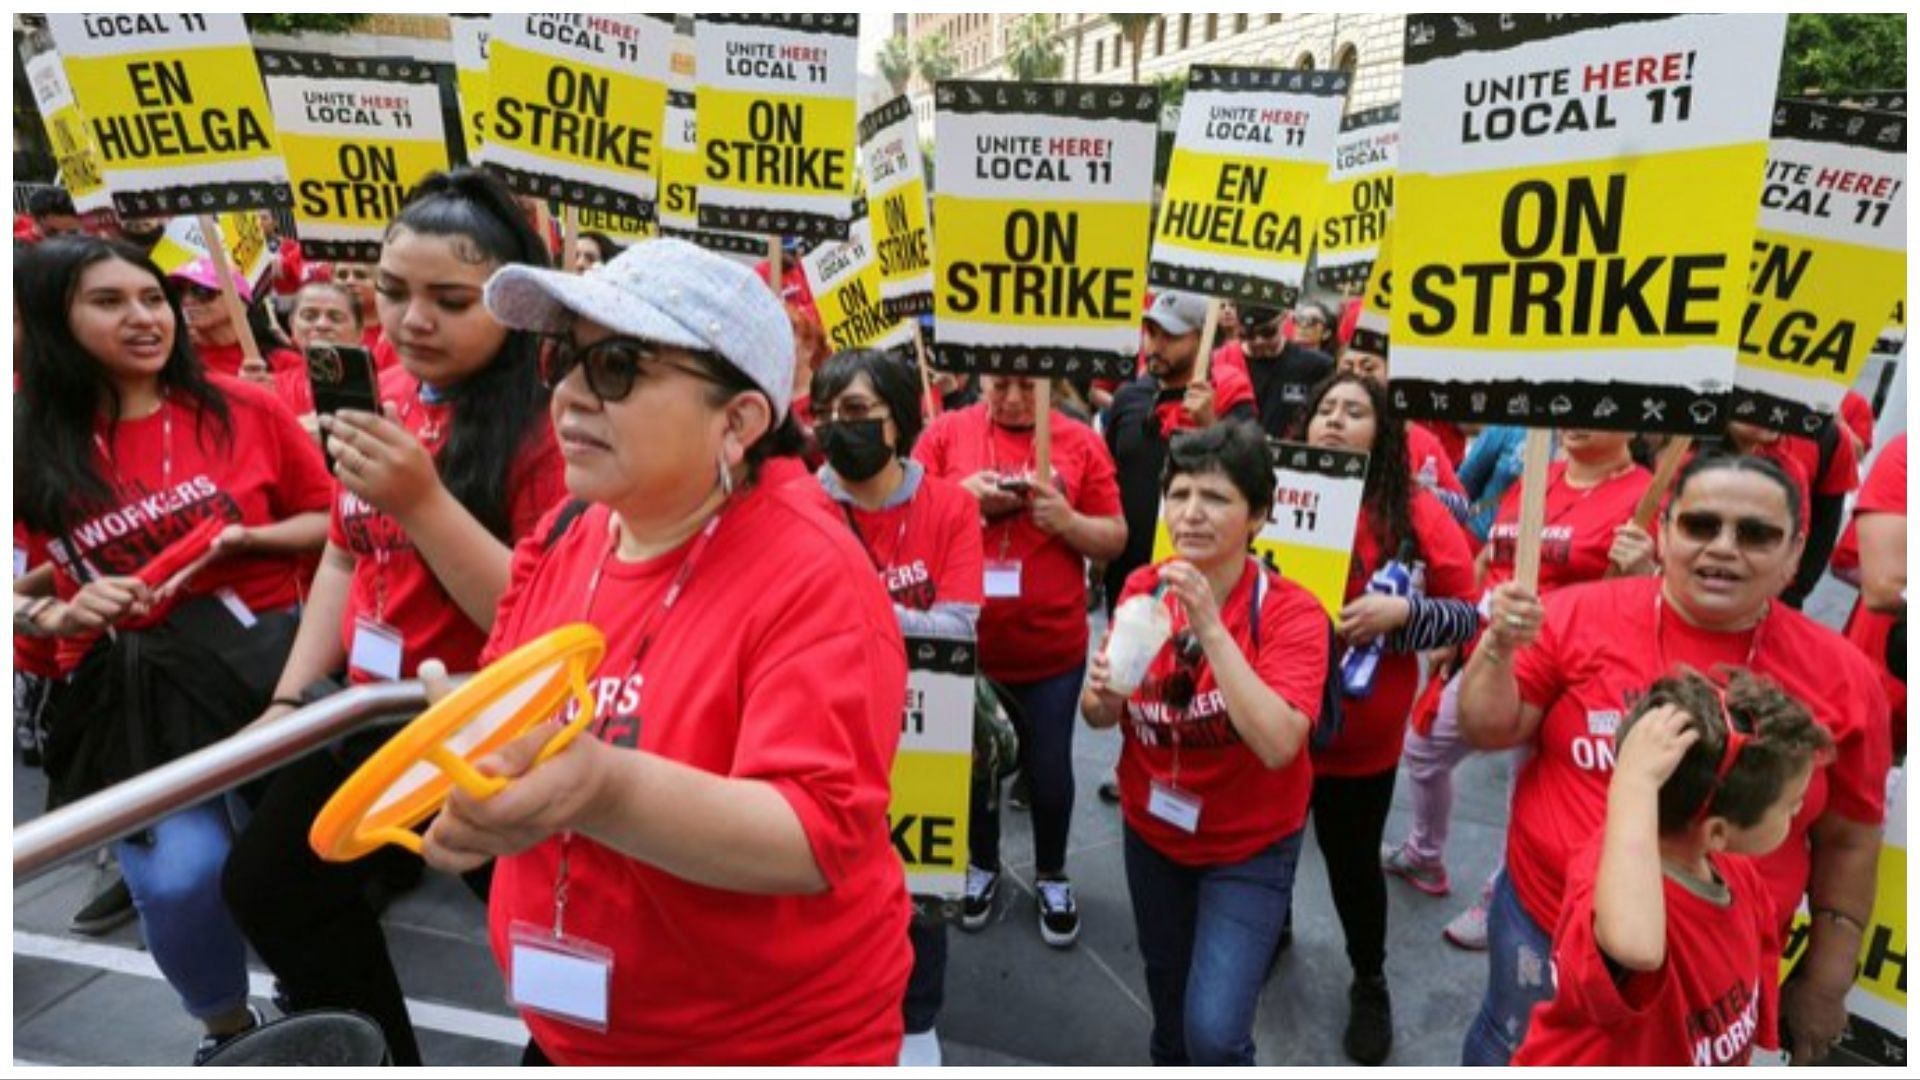 LA hotel workers return to work on Wednesday after calling a strike on Sunday, (Image via Trek Maestro/Twitter)